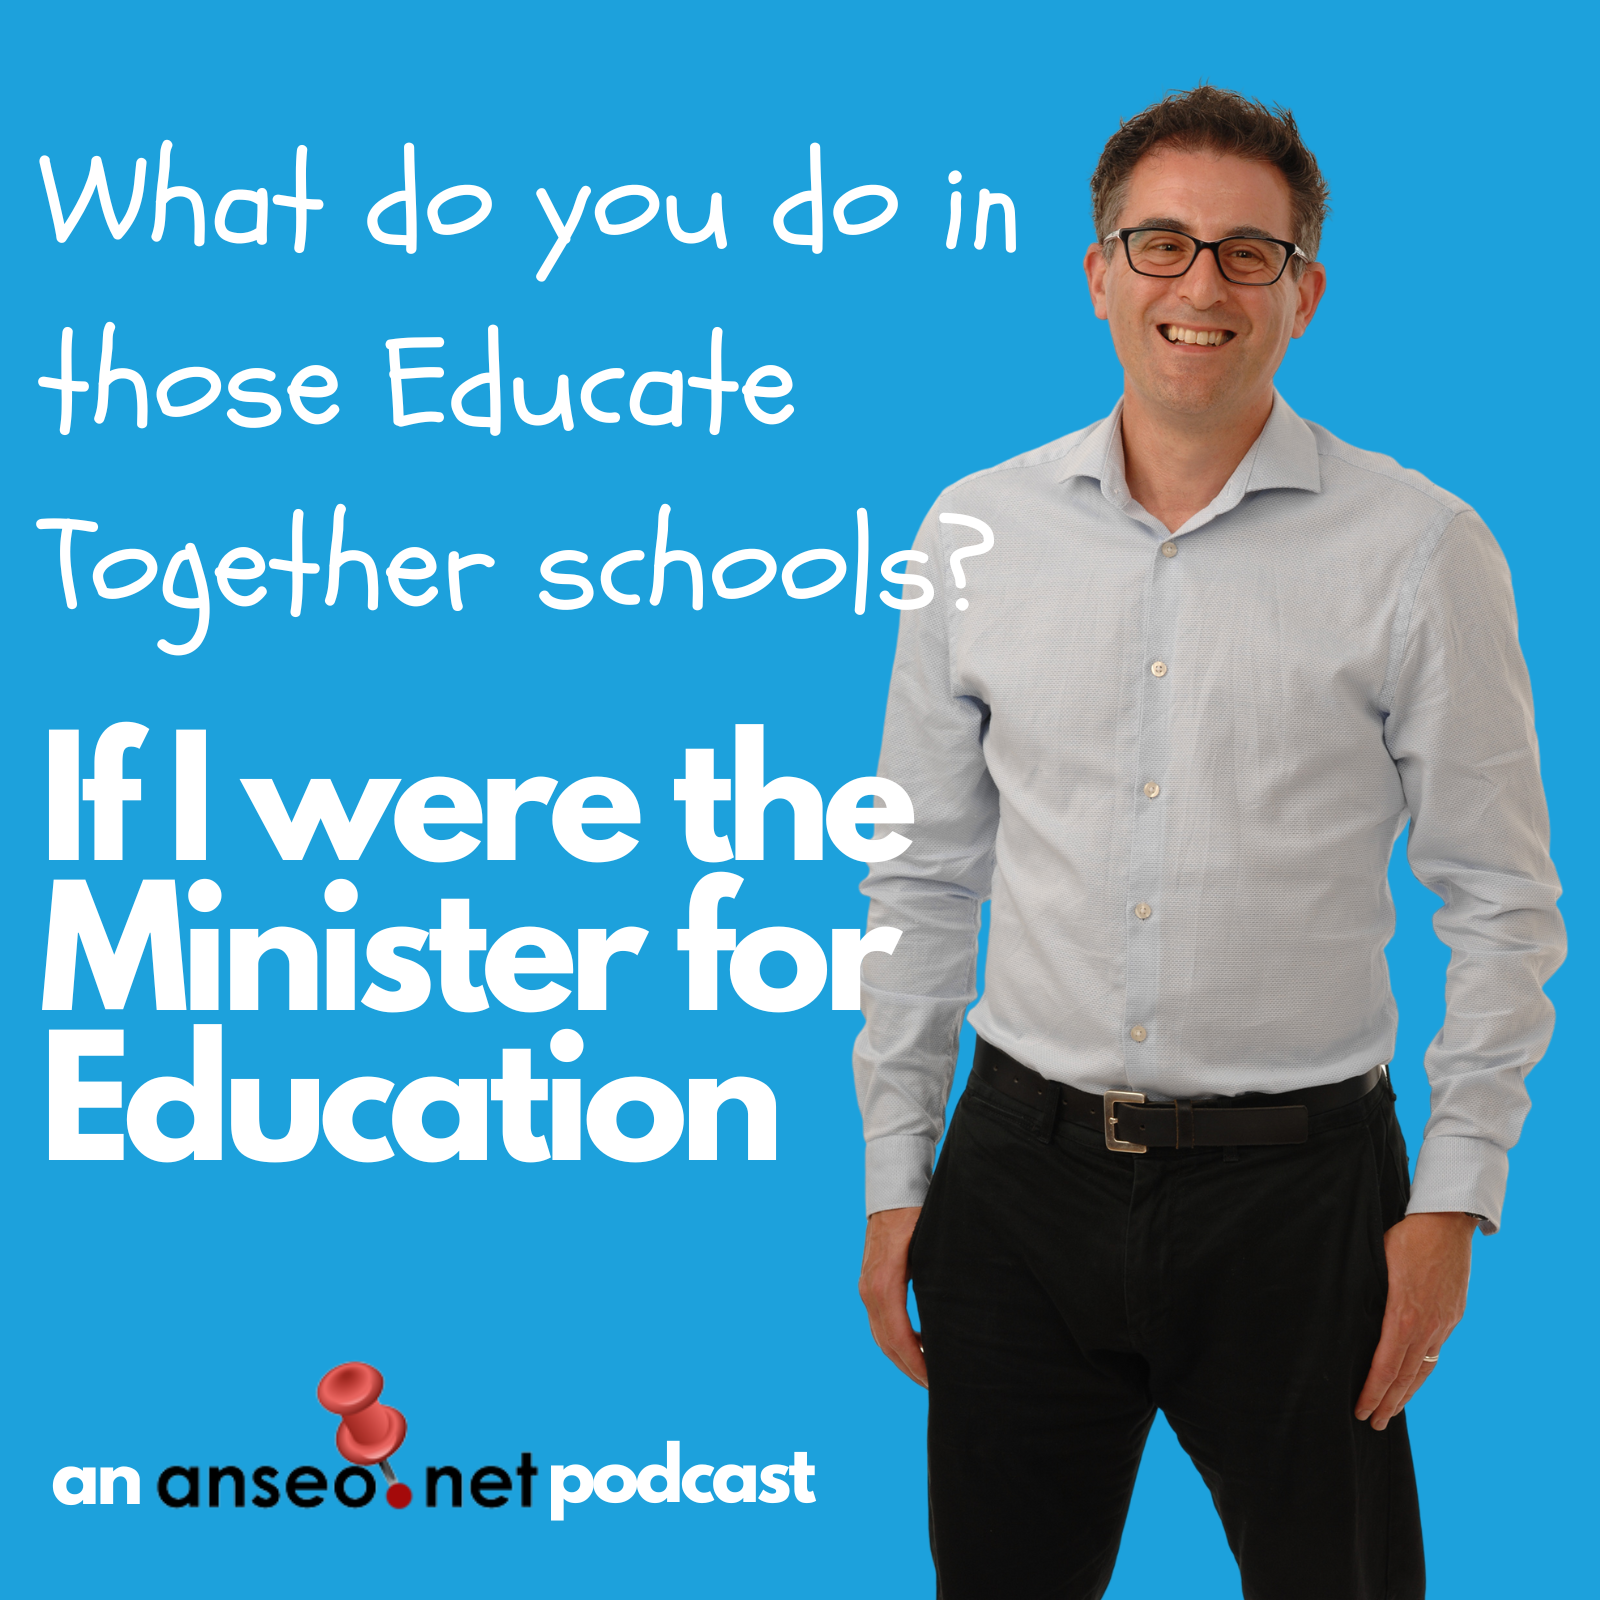 What do you do in those Educate Together schools?